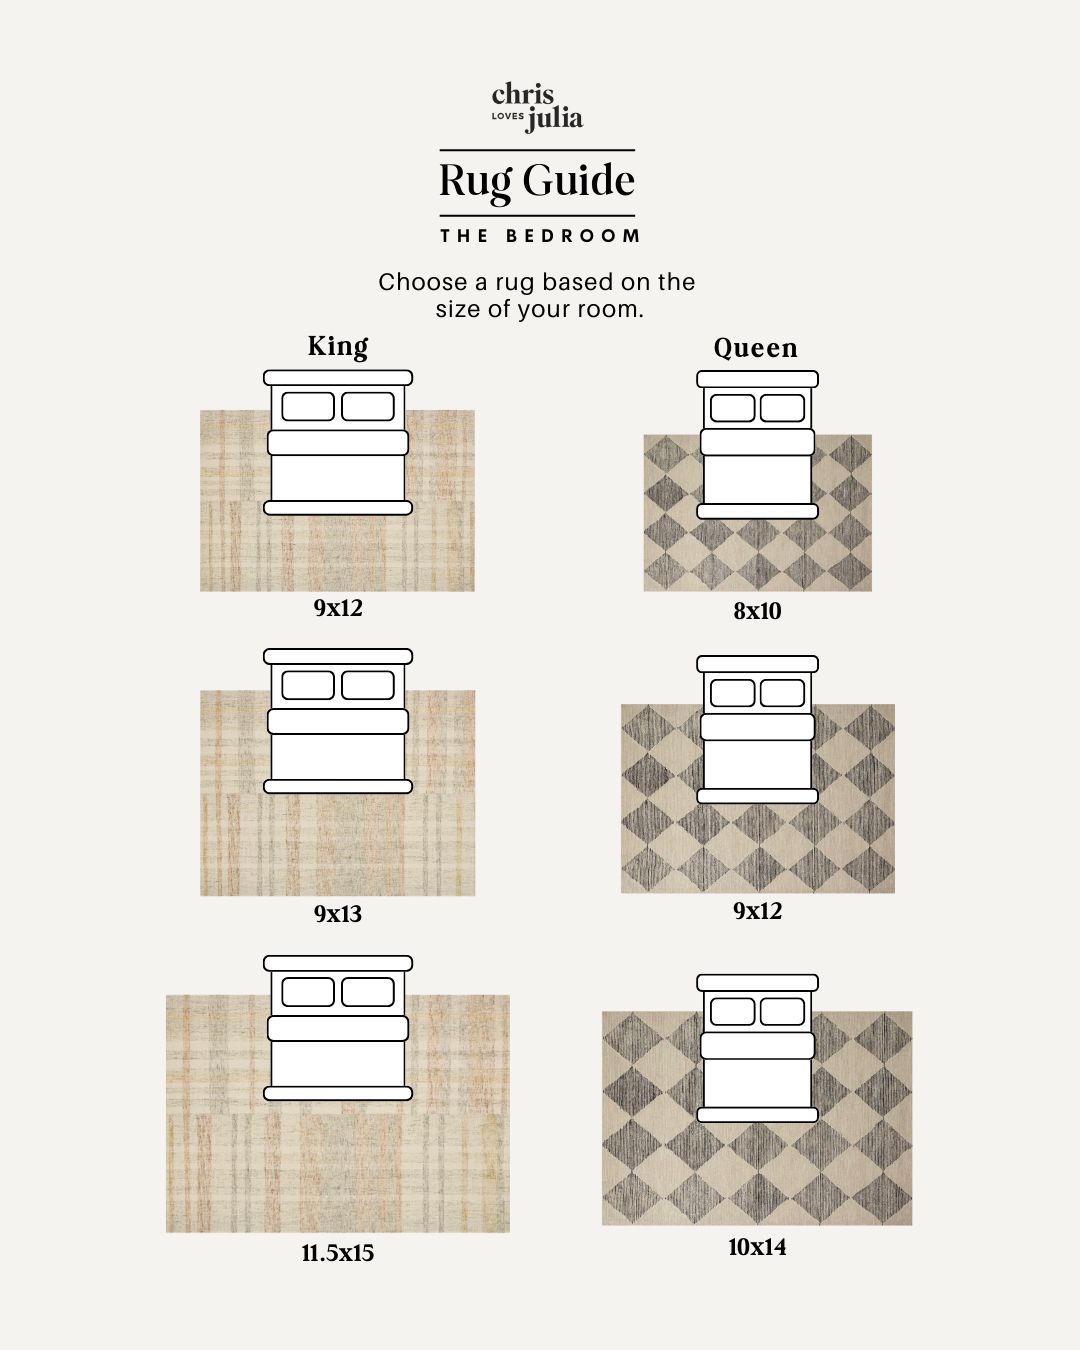 Rug Under Bed Sizes  King, Queen, Double & Child + Images